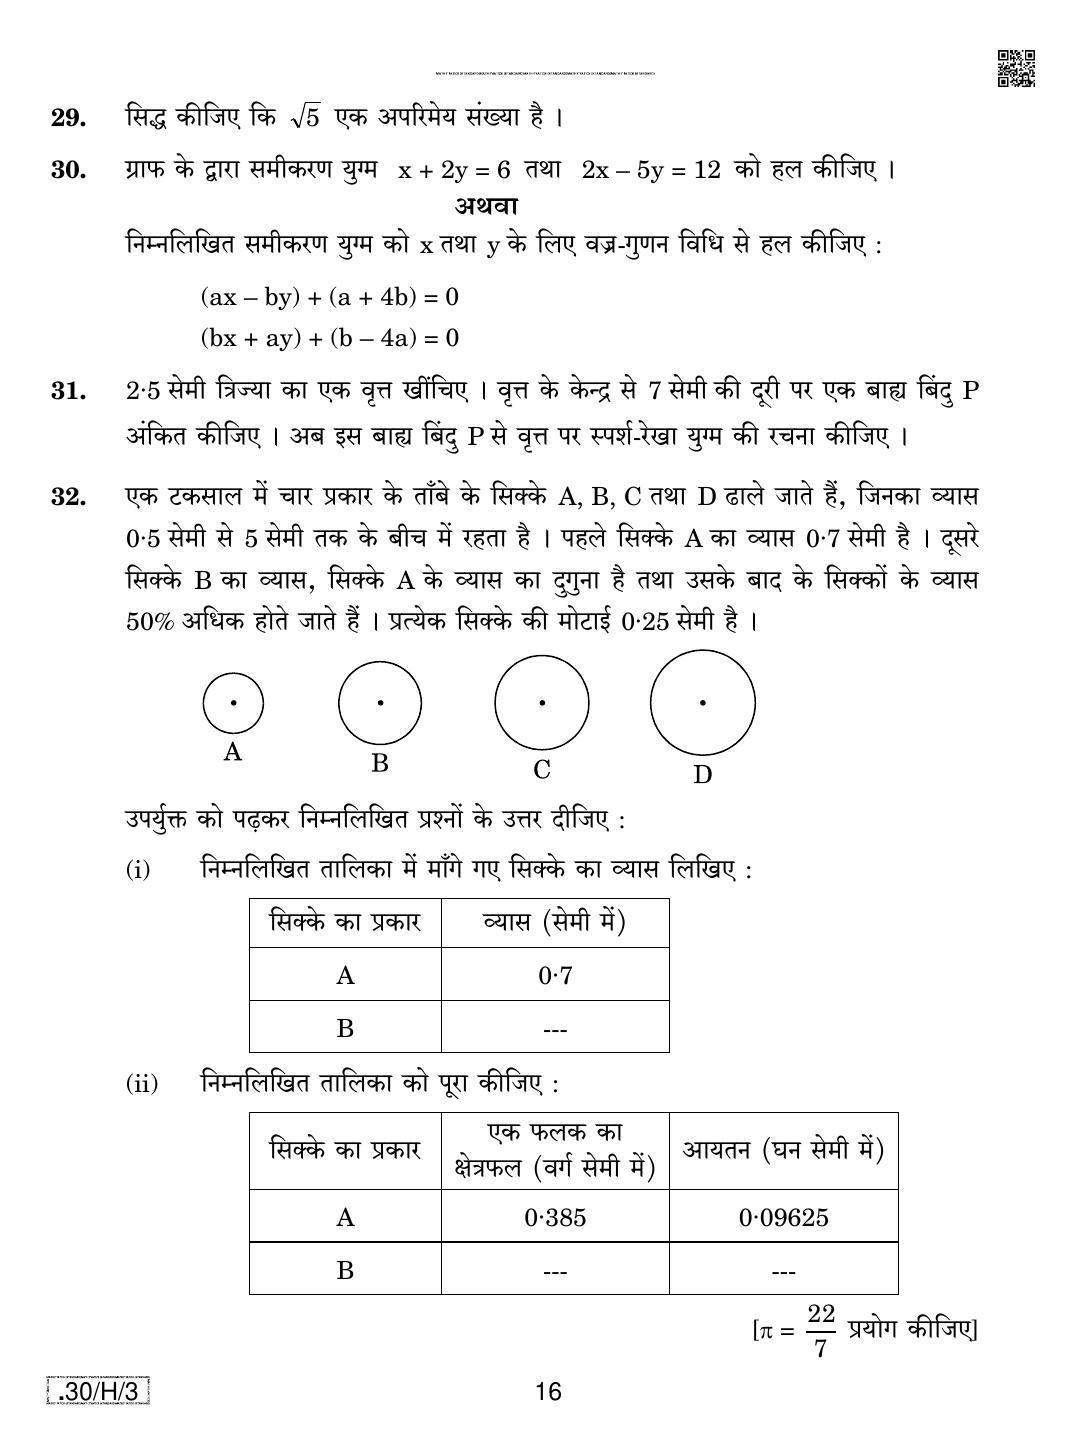 CBSE Class 10 30-C-3 - Maths (Standard) 2020 Compartment Question Paper - Page 16